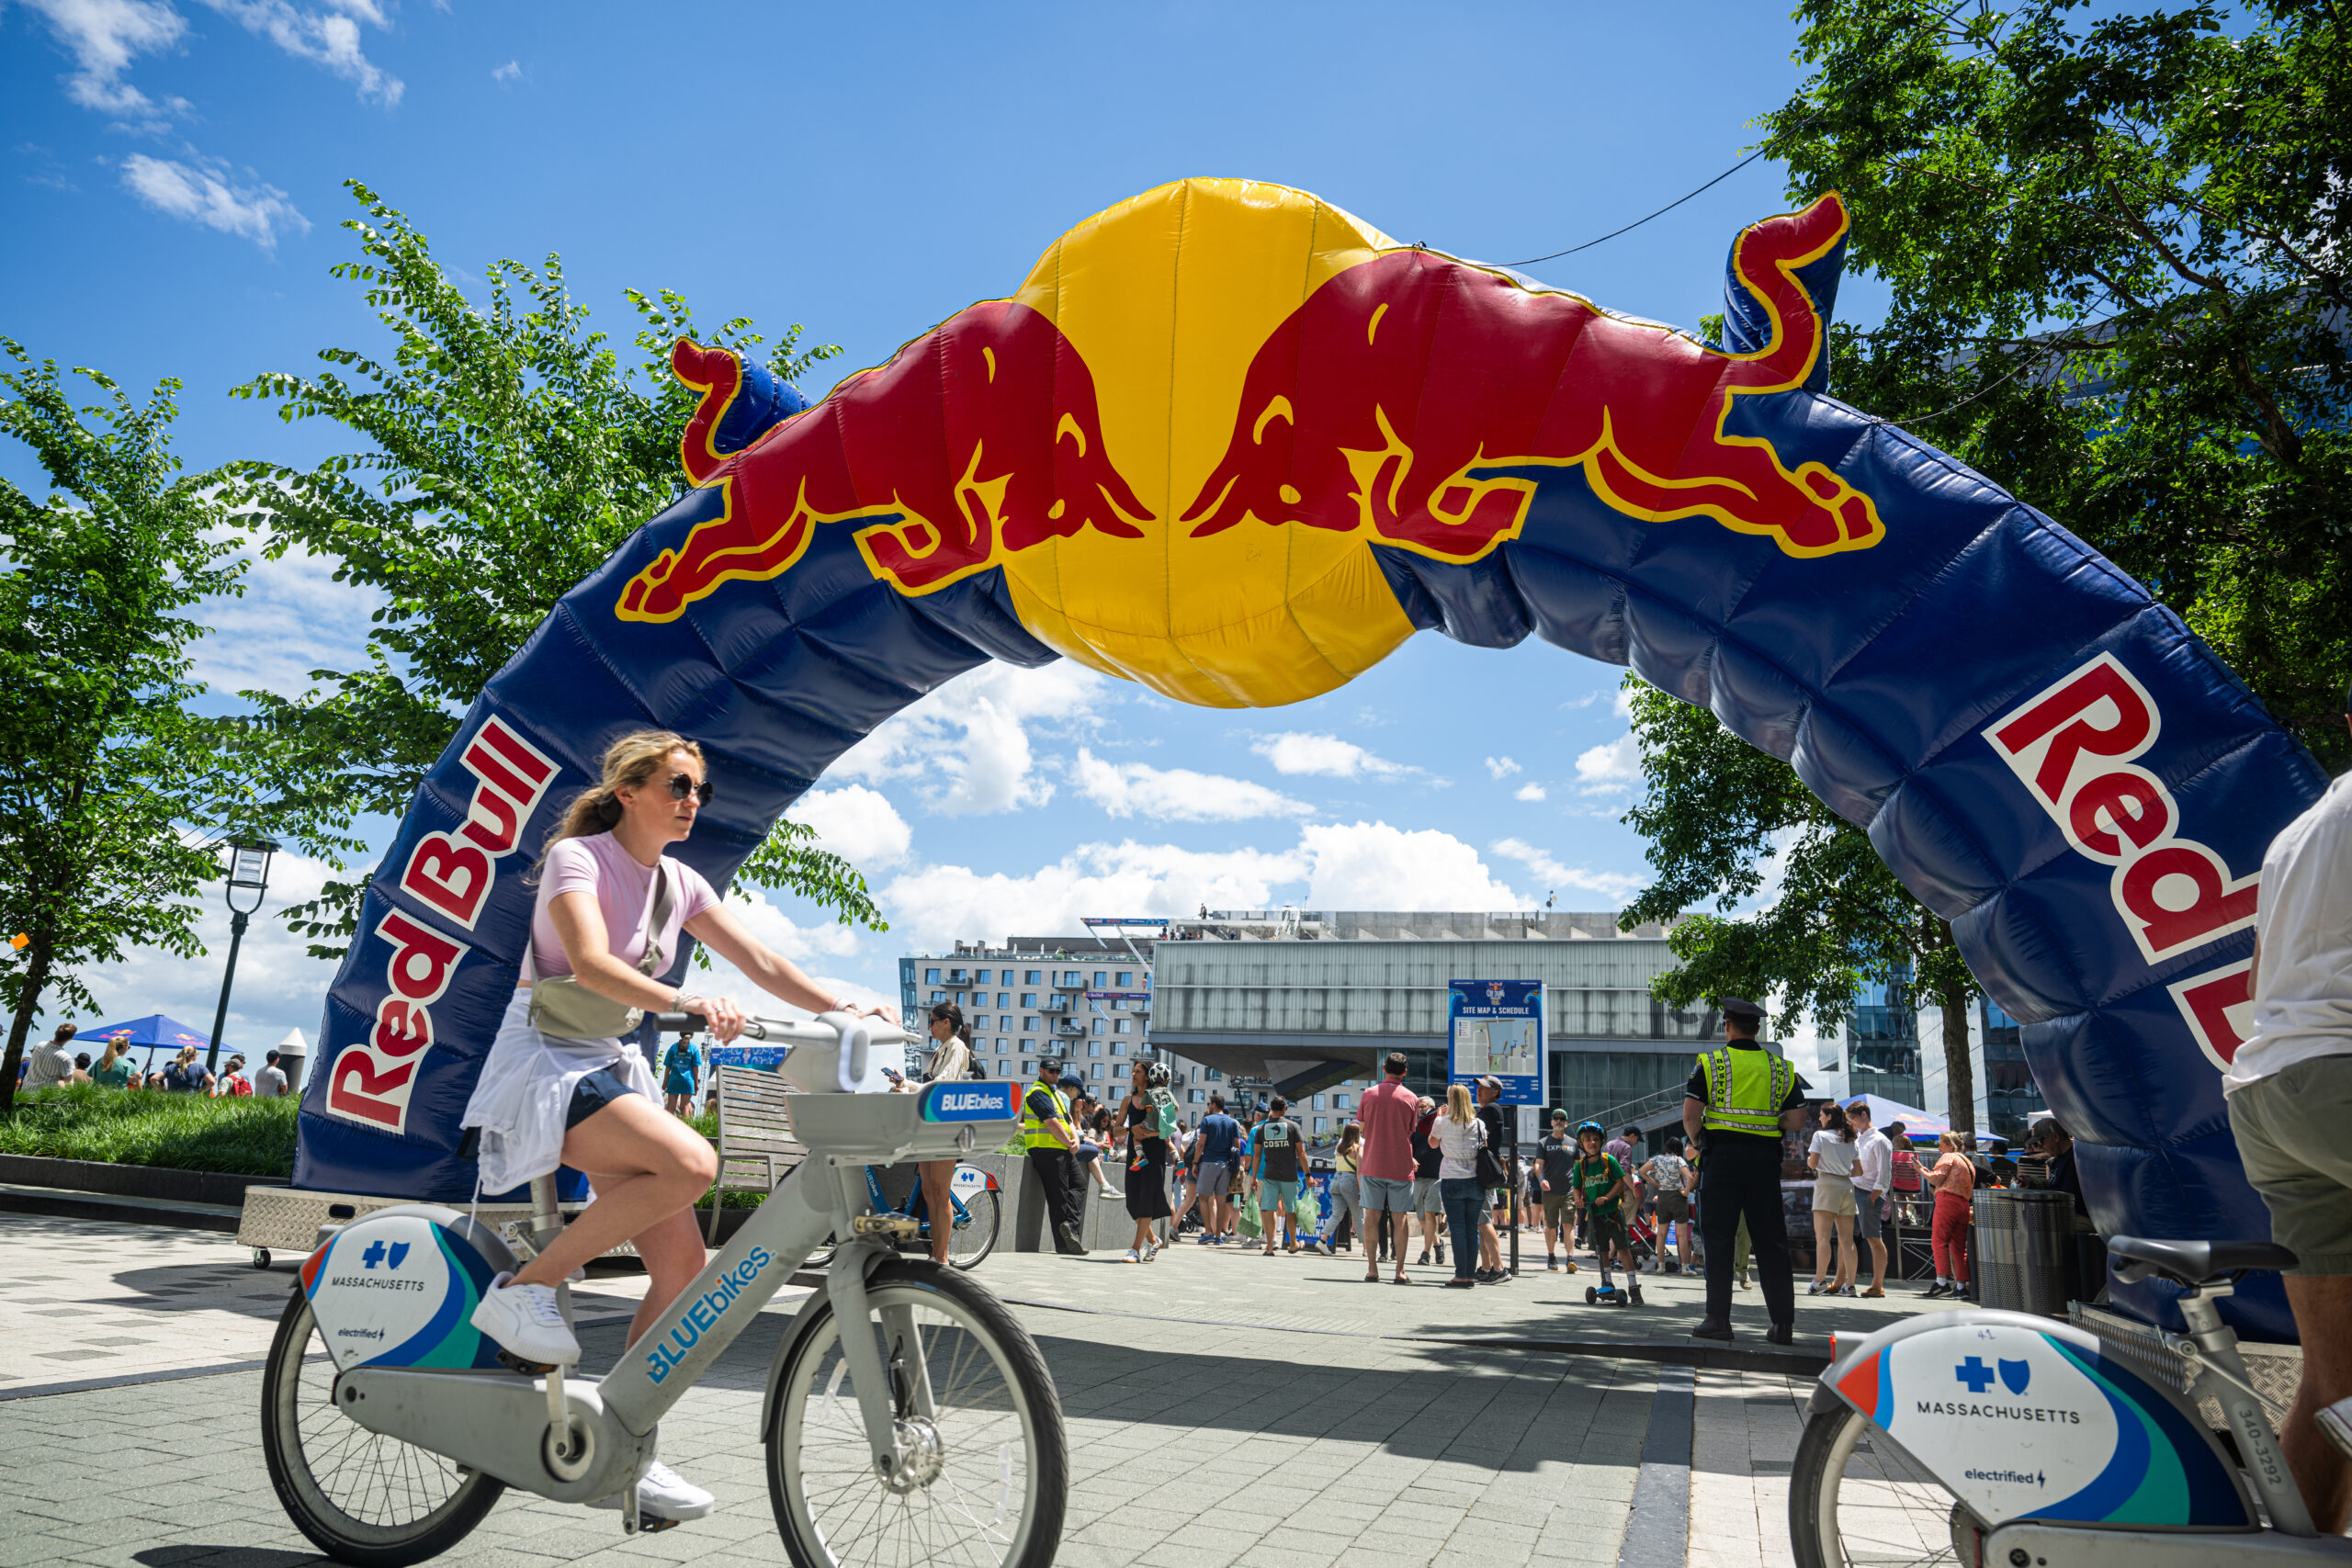 Woman biking in front of Red Bull balloon arch